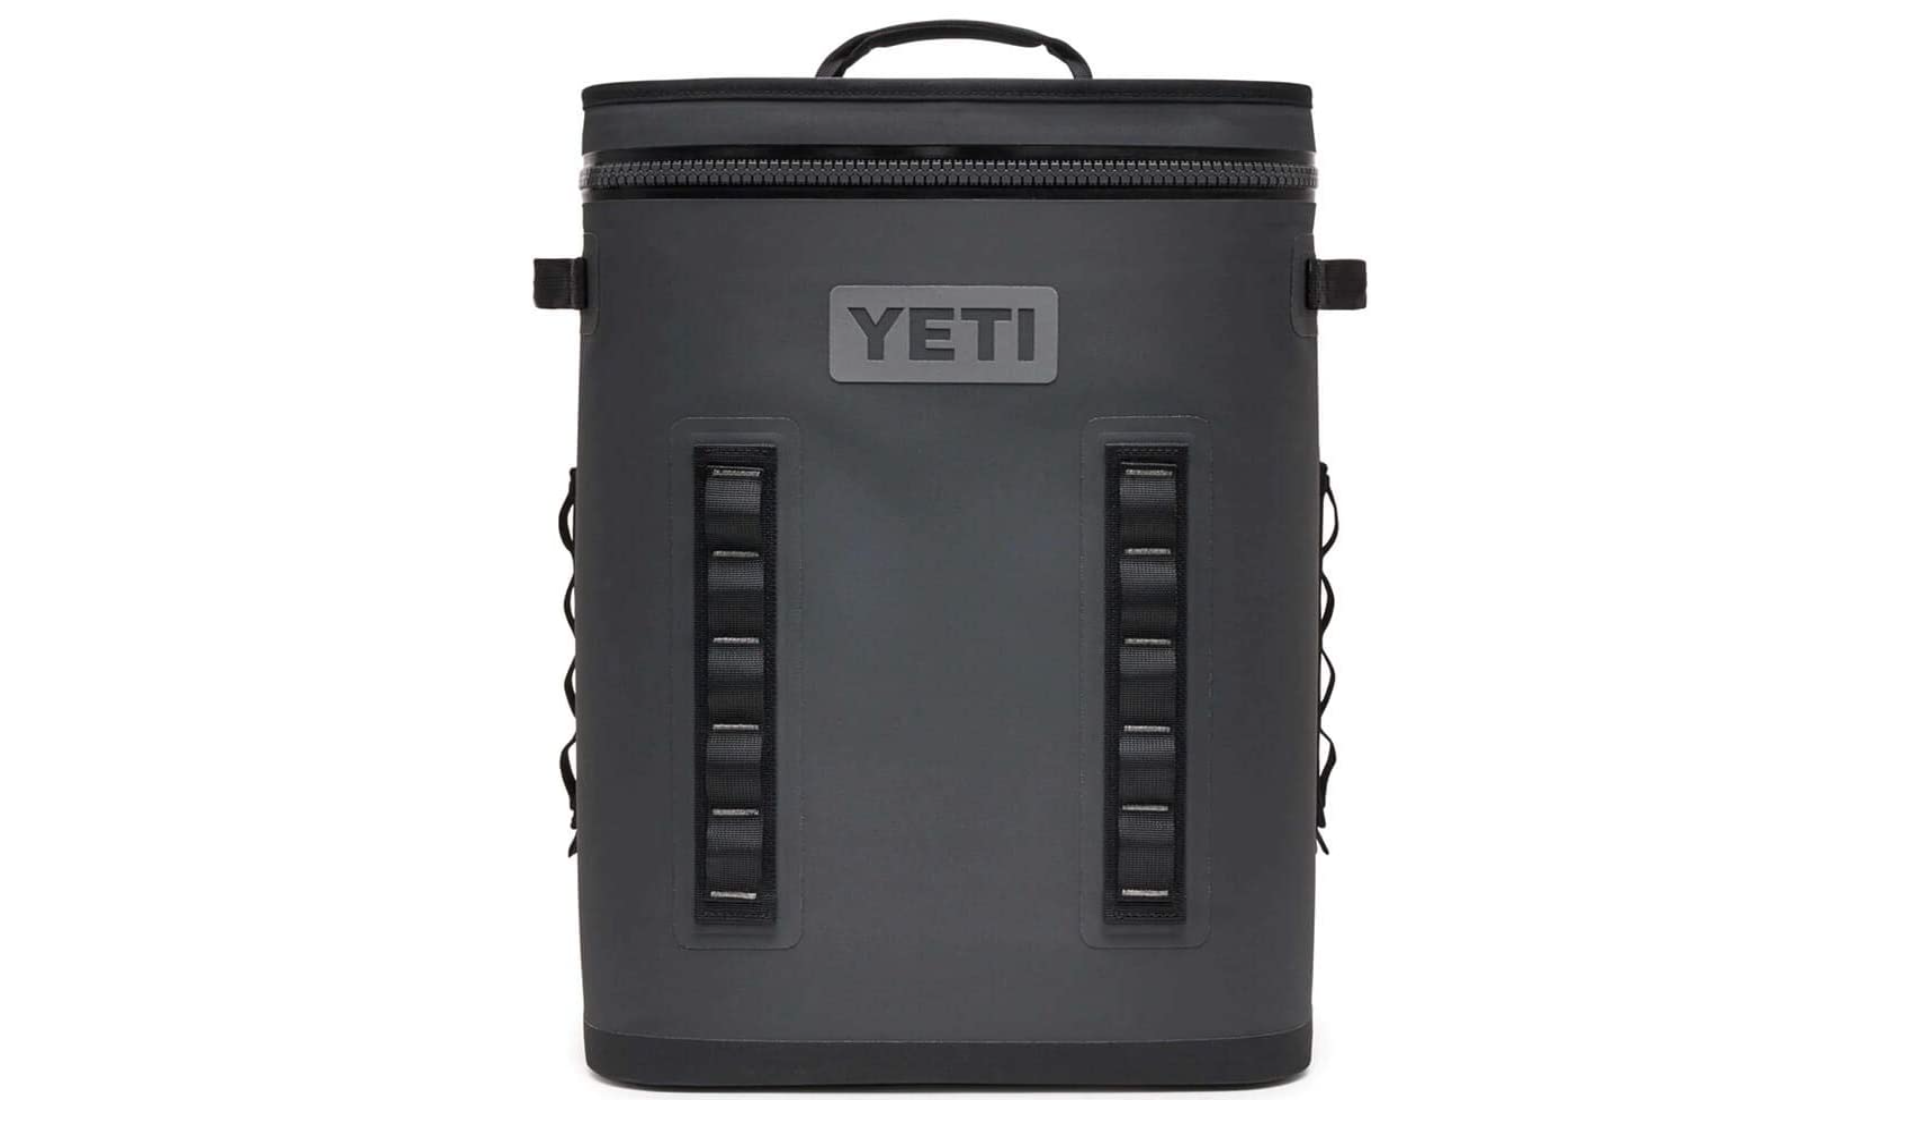 Guide to Yeti Backpack Coolers